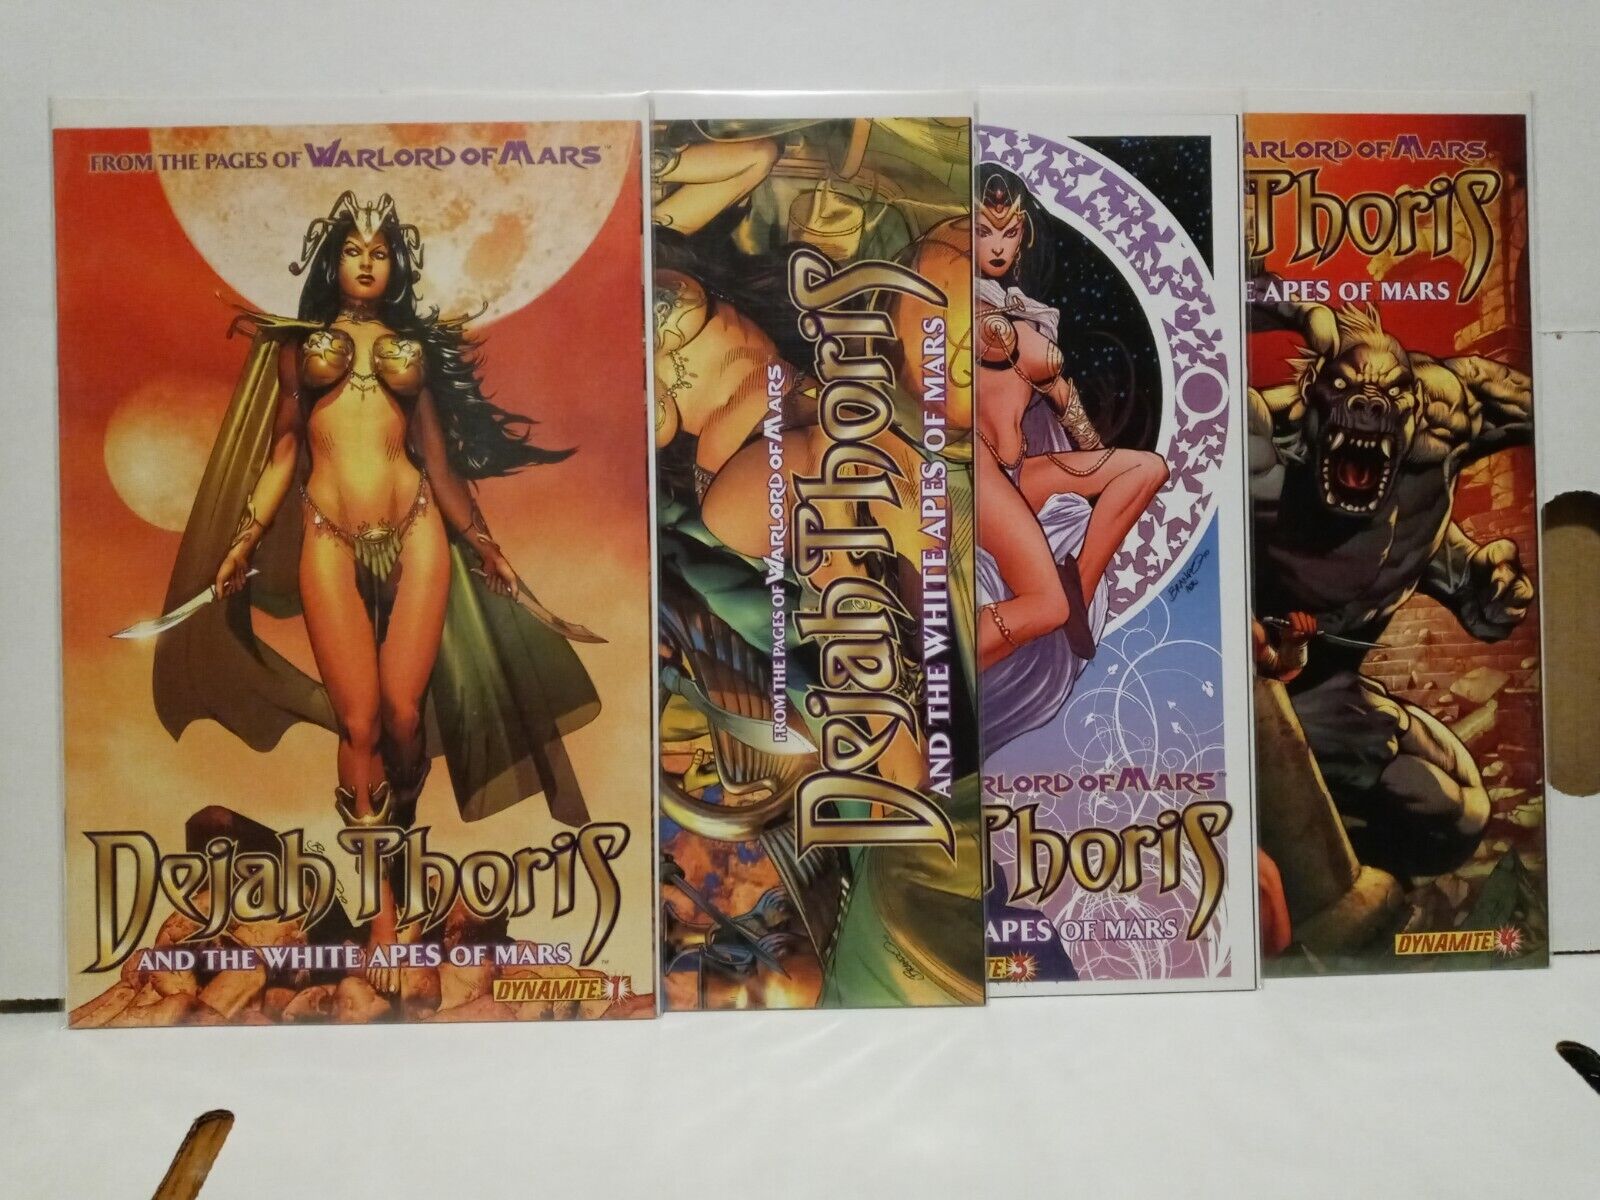 Dejah Thoris and the White Apes of Mars #1-#4 (Dynamite Entertainment, 2013)